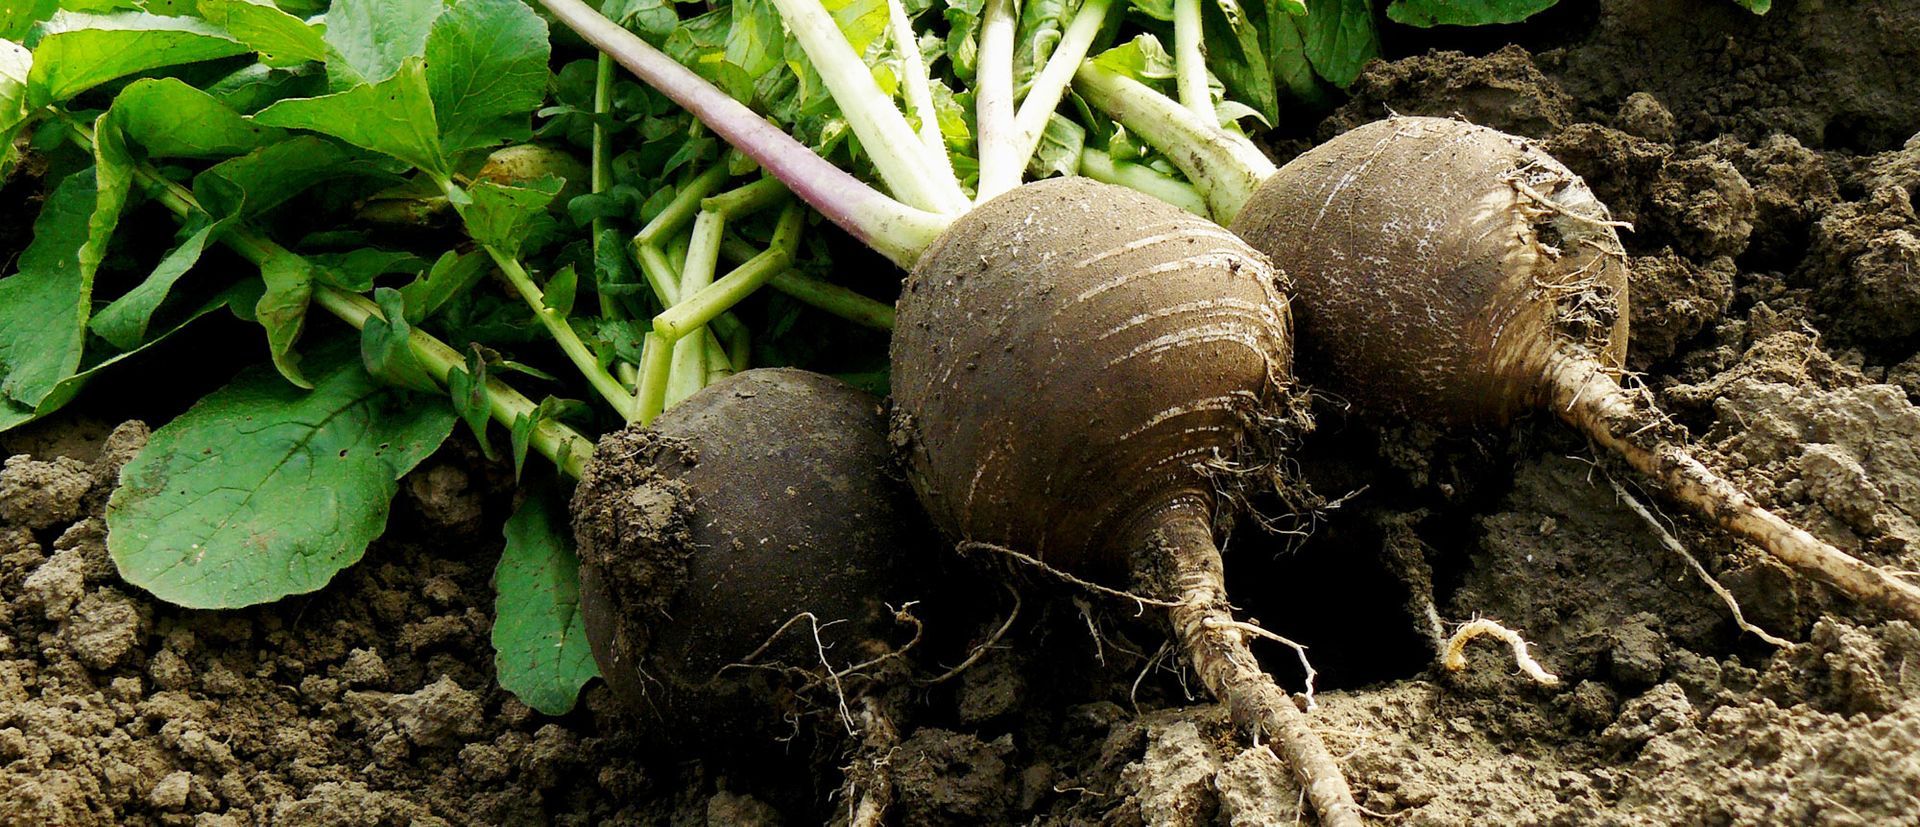 Spanish Black Radish Health Benefits by Dr. Alicia Armitstead. Learn about Spanish Black Radish supplements from my visit to the Standard Process Farm.